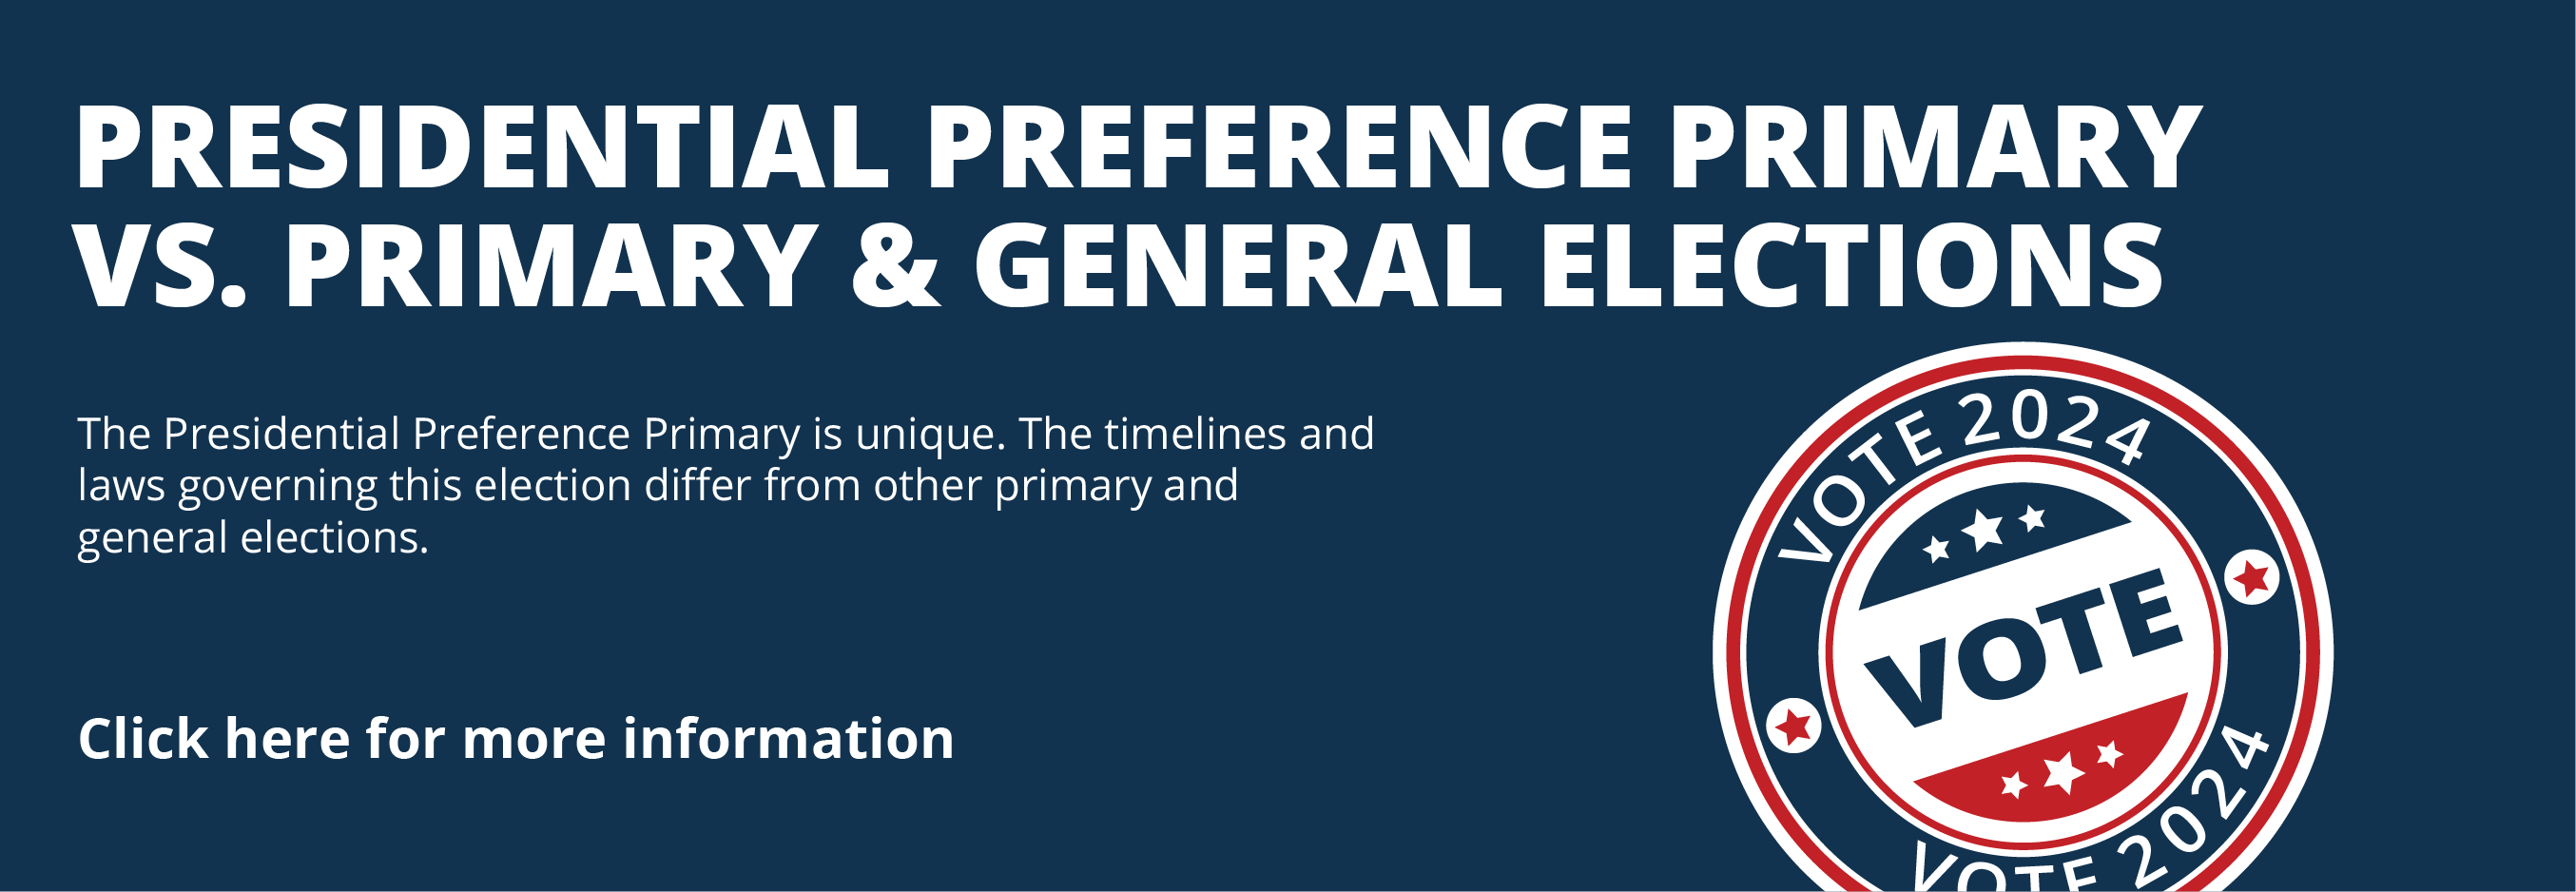 Presidential Preference Primary image